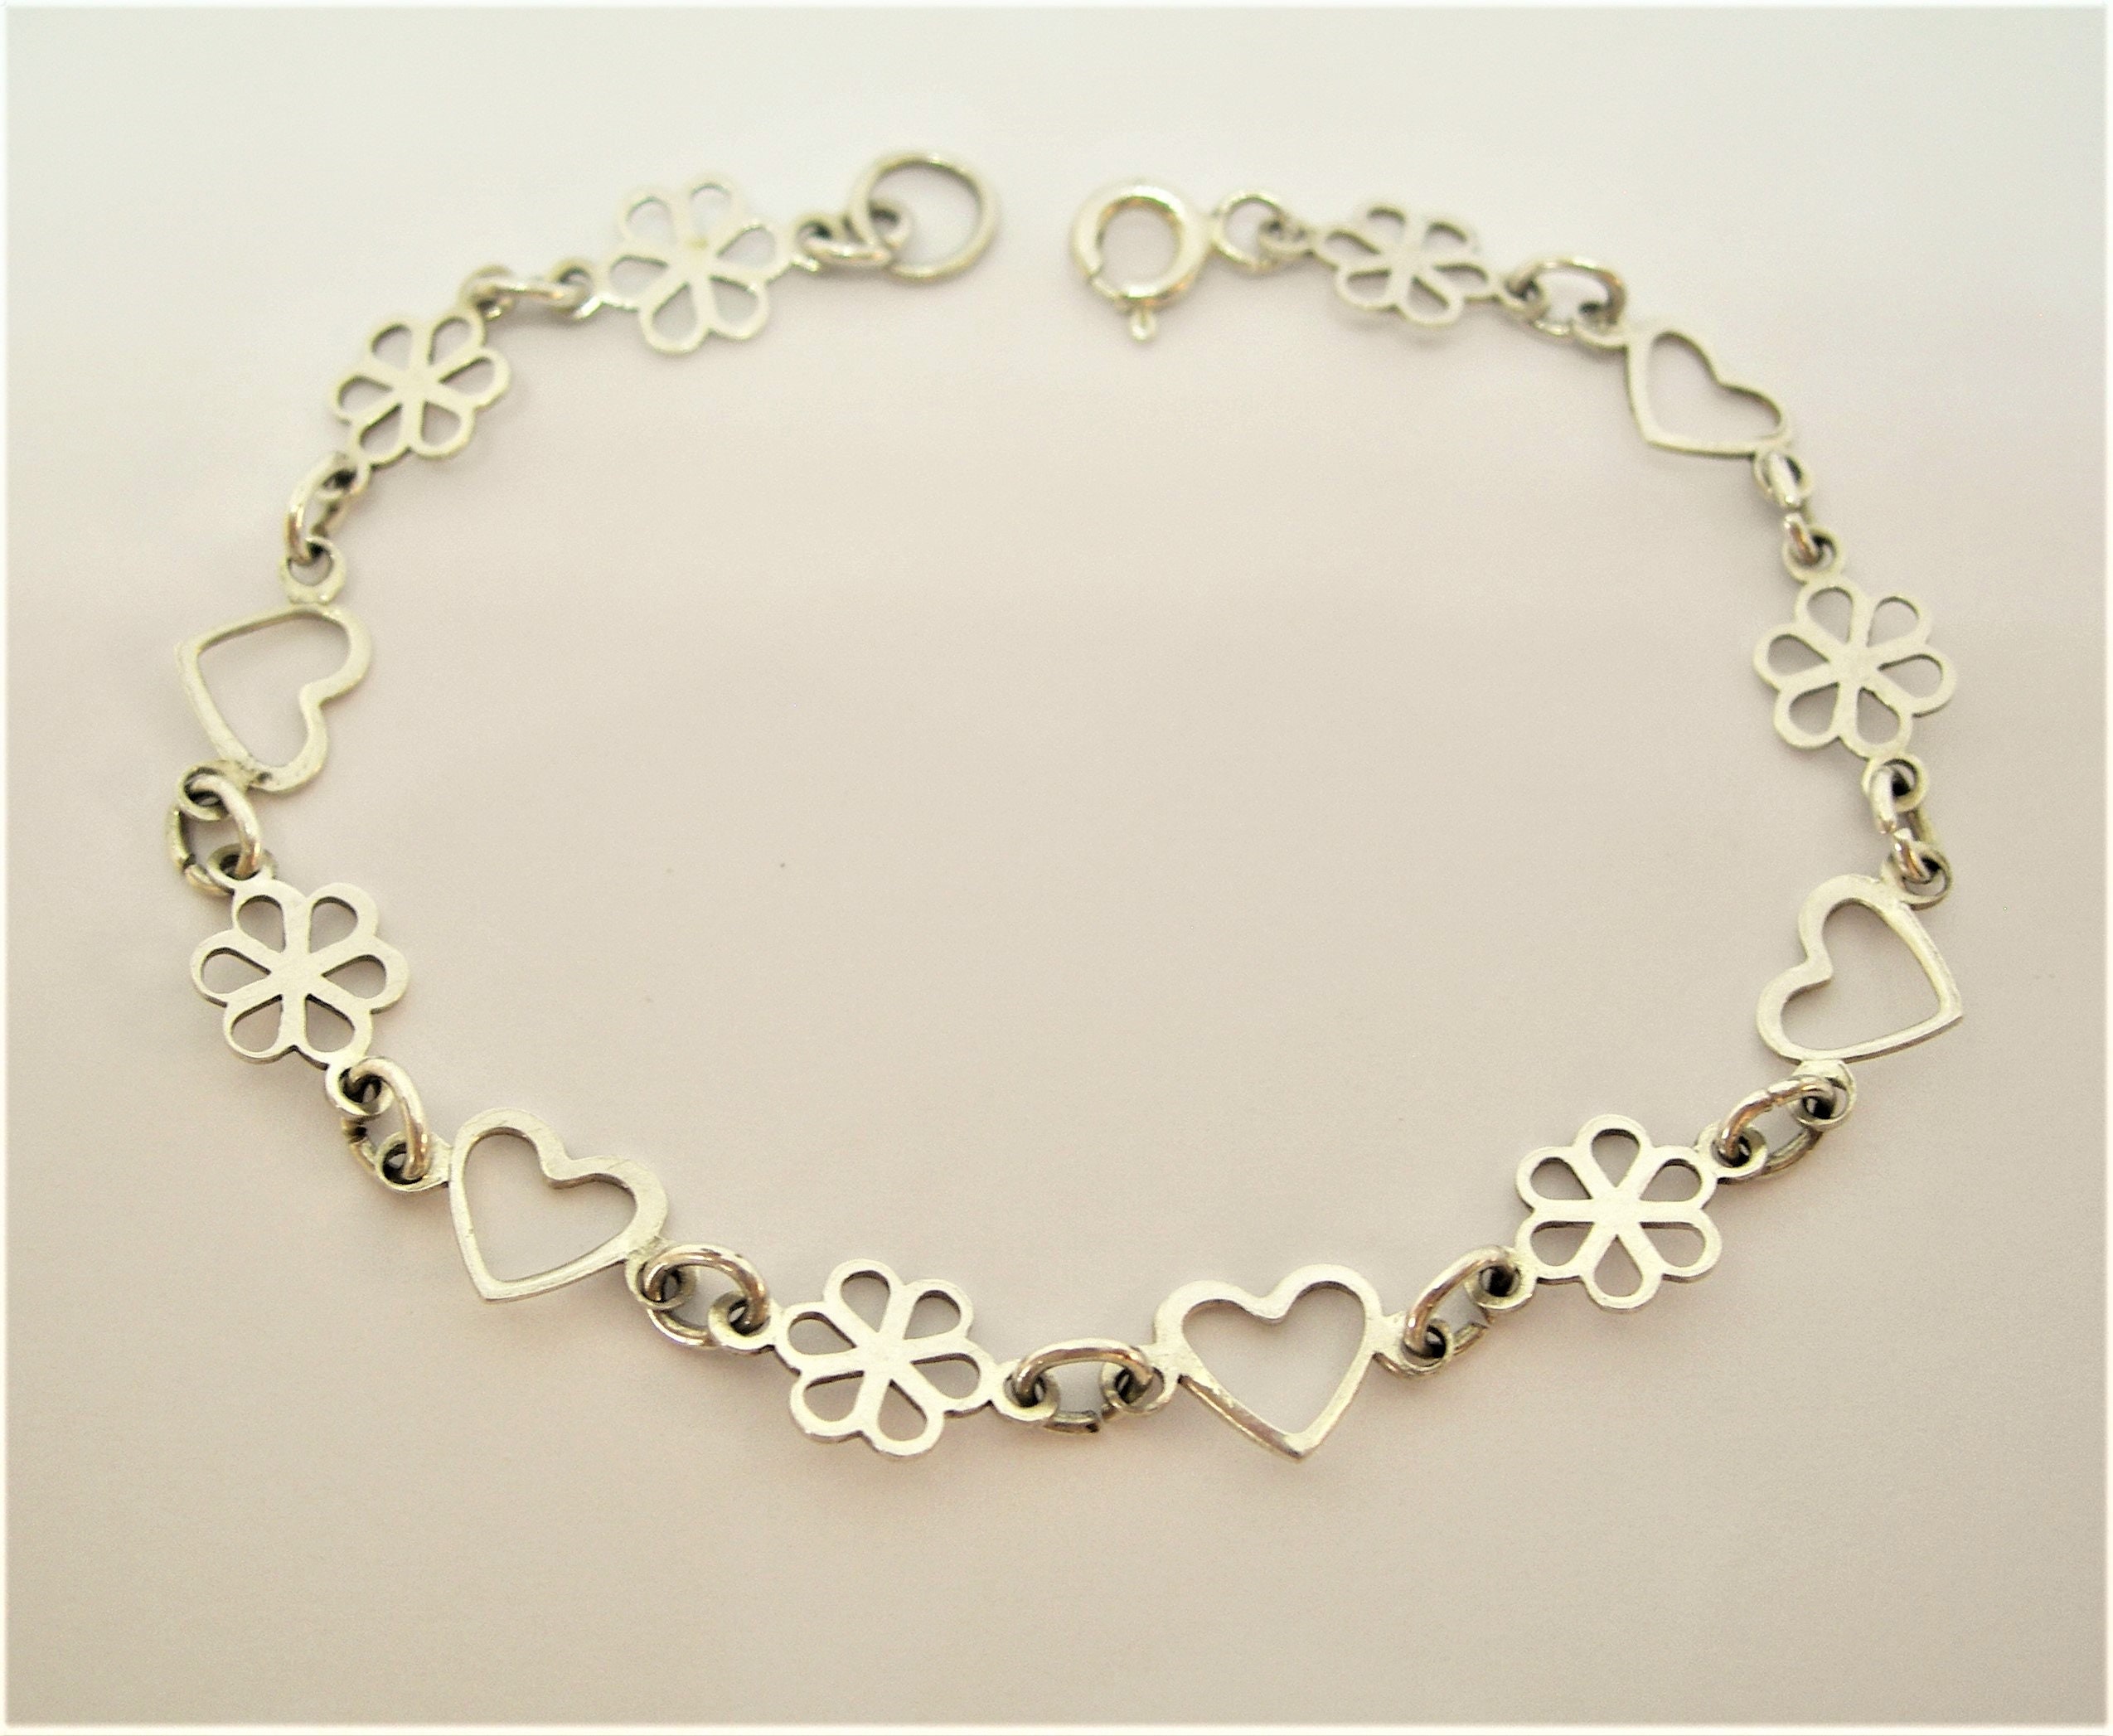 Silver Bracelet With Little Hearts and Flowers for Little Princess - Etsy